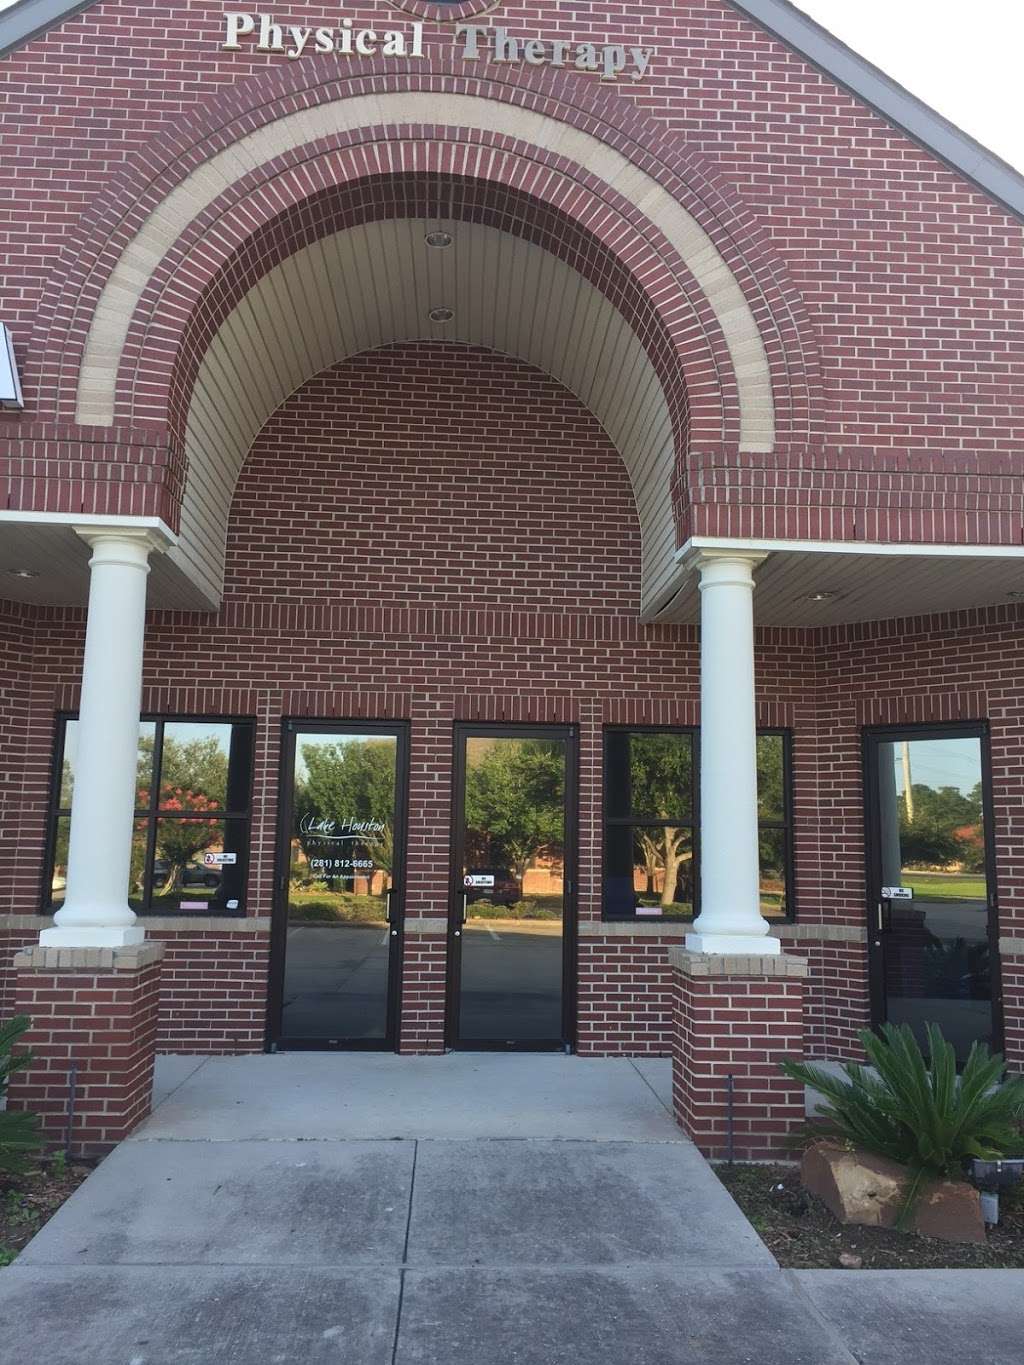 Lake Houston Physical Therapy | 7840 FM 1960 Suite 408-409, Humble, TX 77346 | Phone: (281) 812-6665